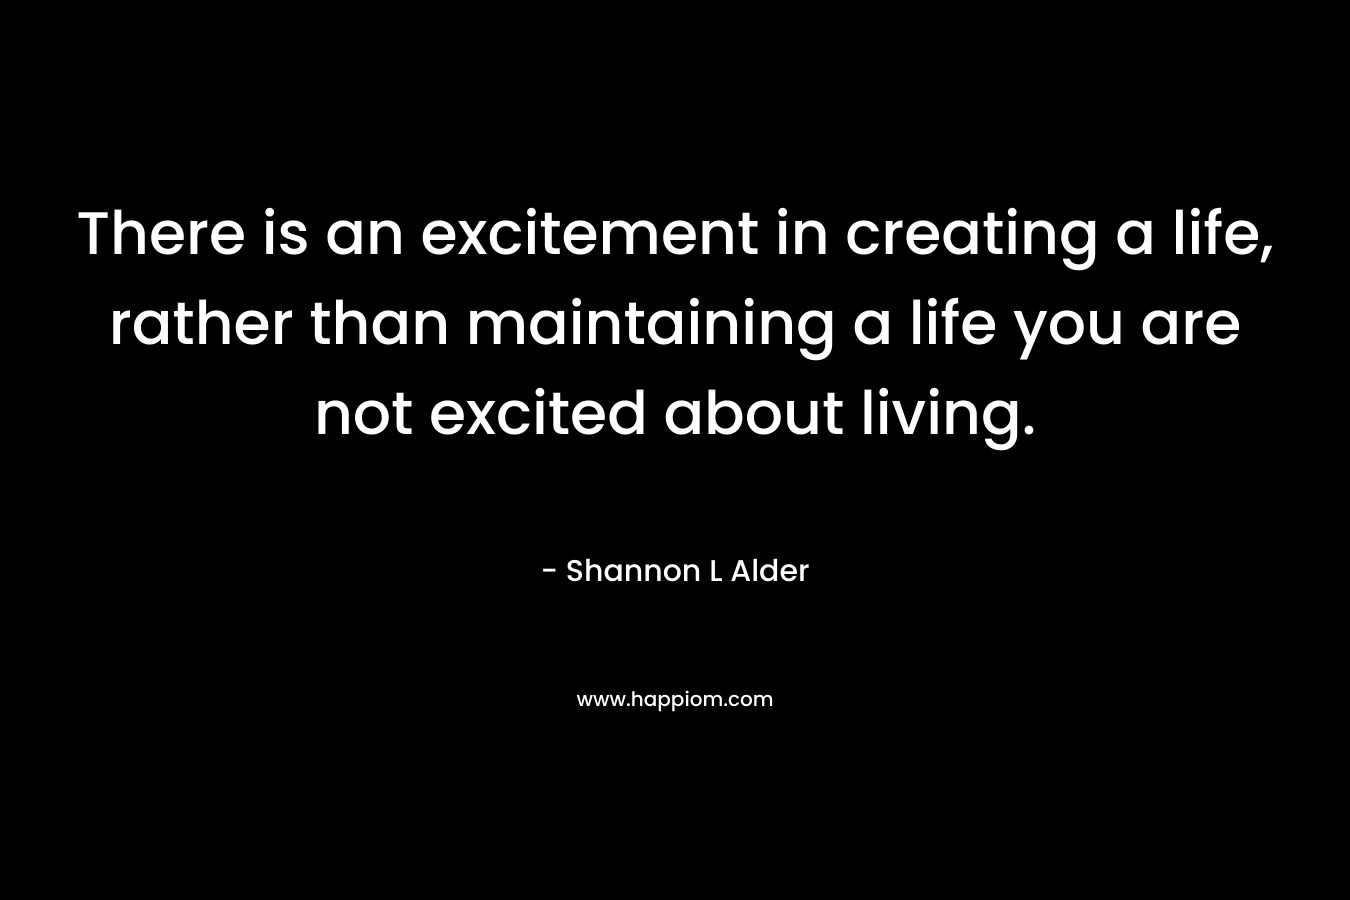 There is an excitement in creating a life, rather than maintaining a life you are not excited about living. – Shannon L Alder